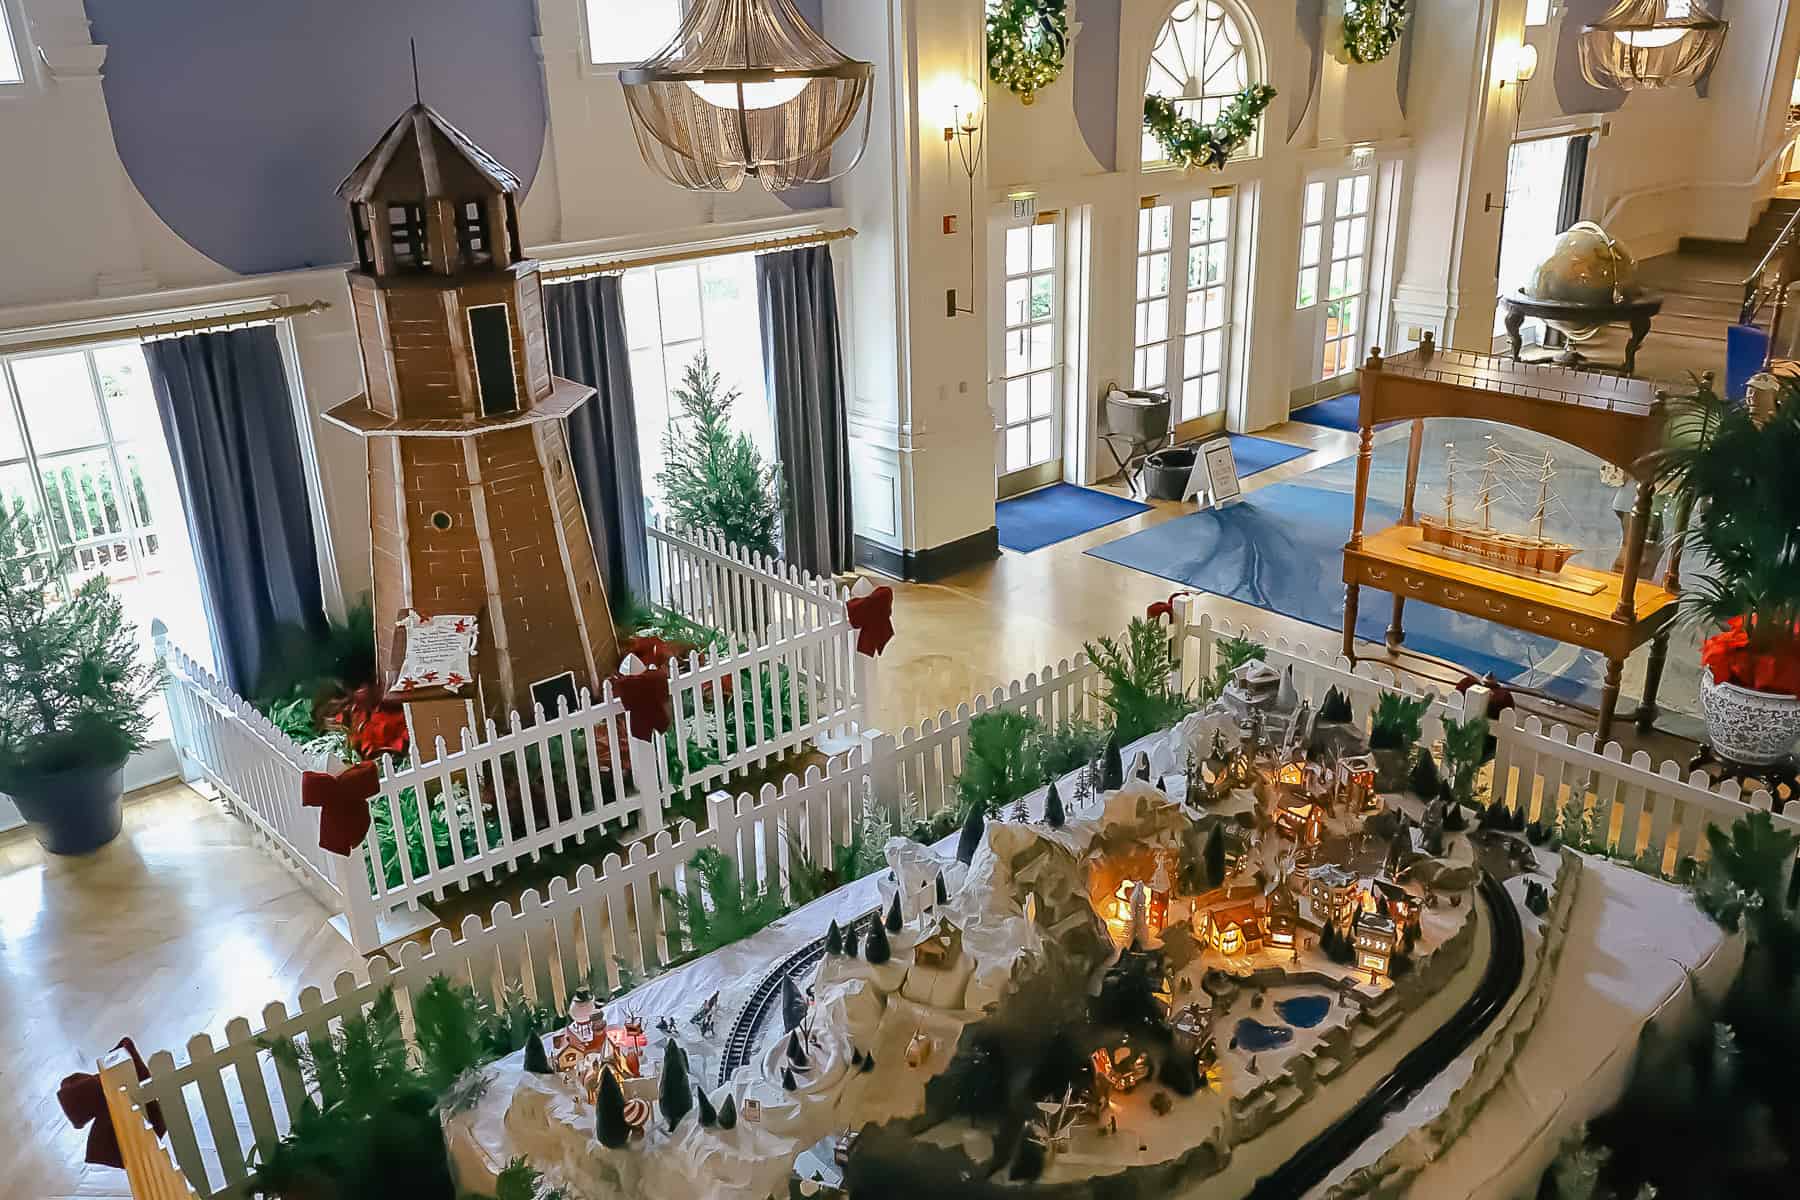 a view of the gingerbread display and train set from the 2nd floor balcony 